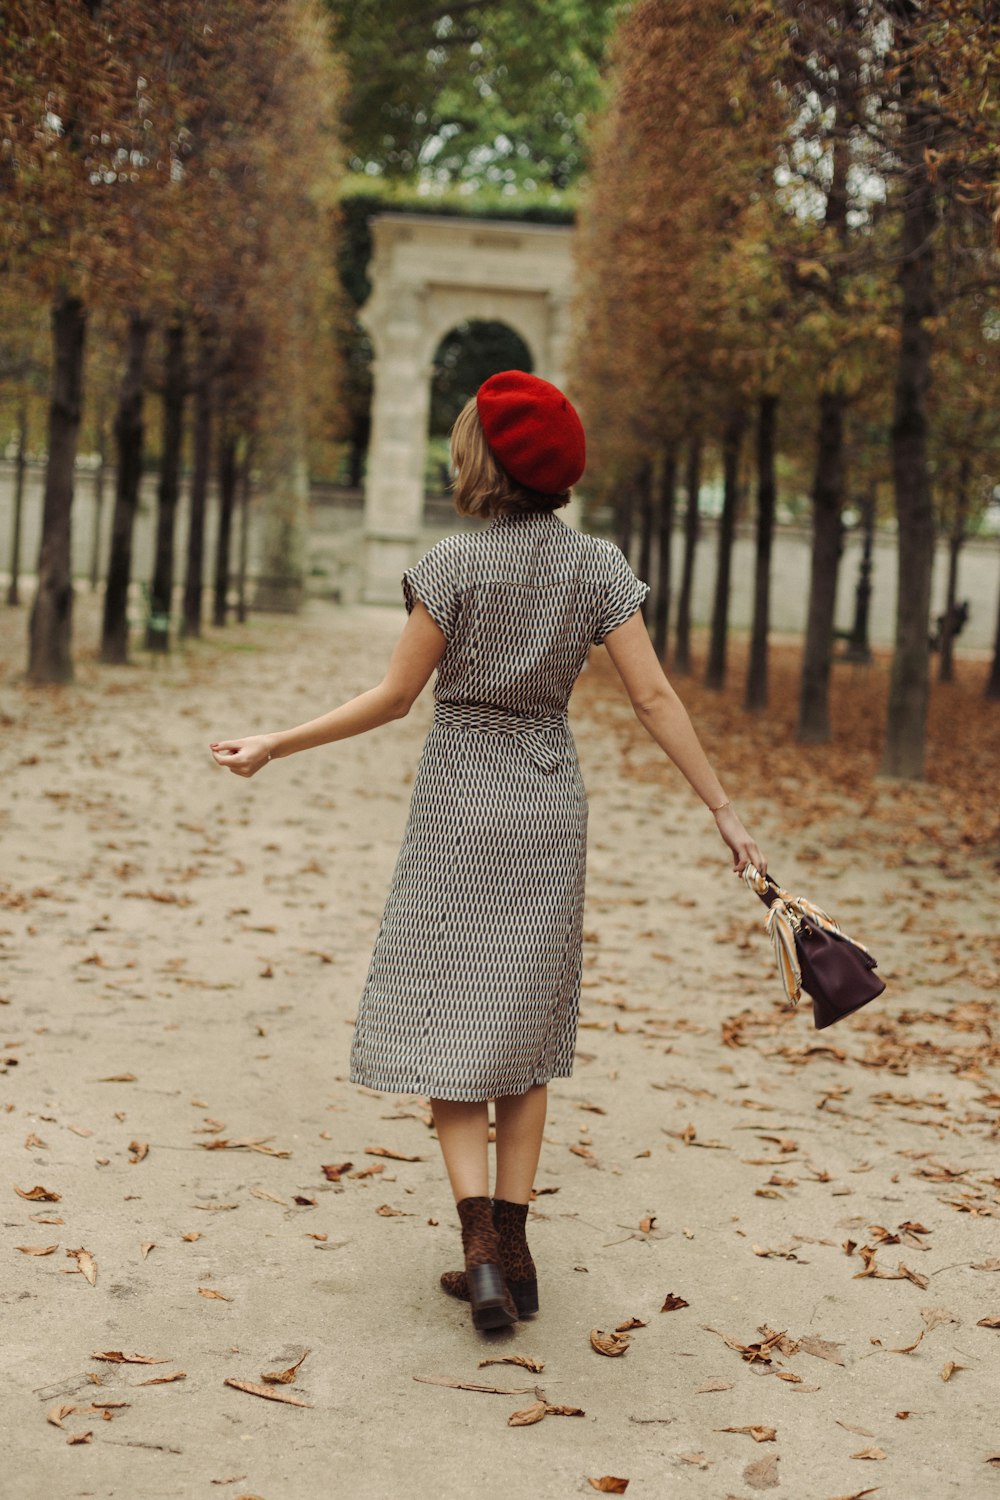 a woman in a dress and a red hat walking down a path